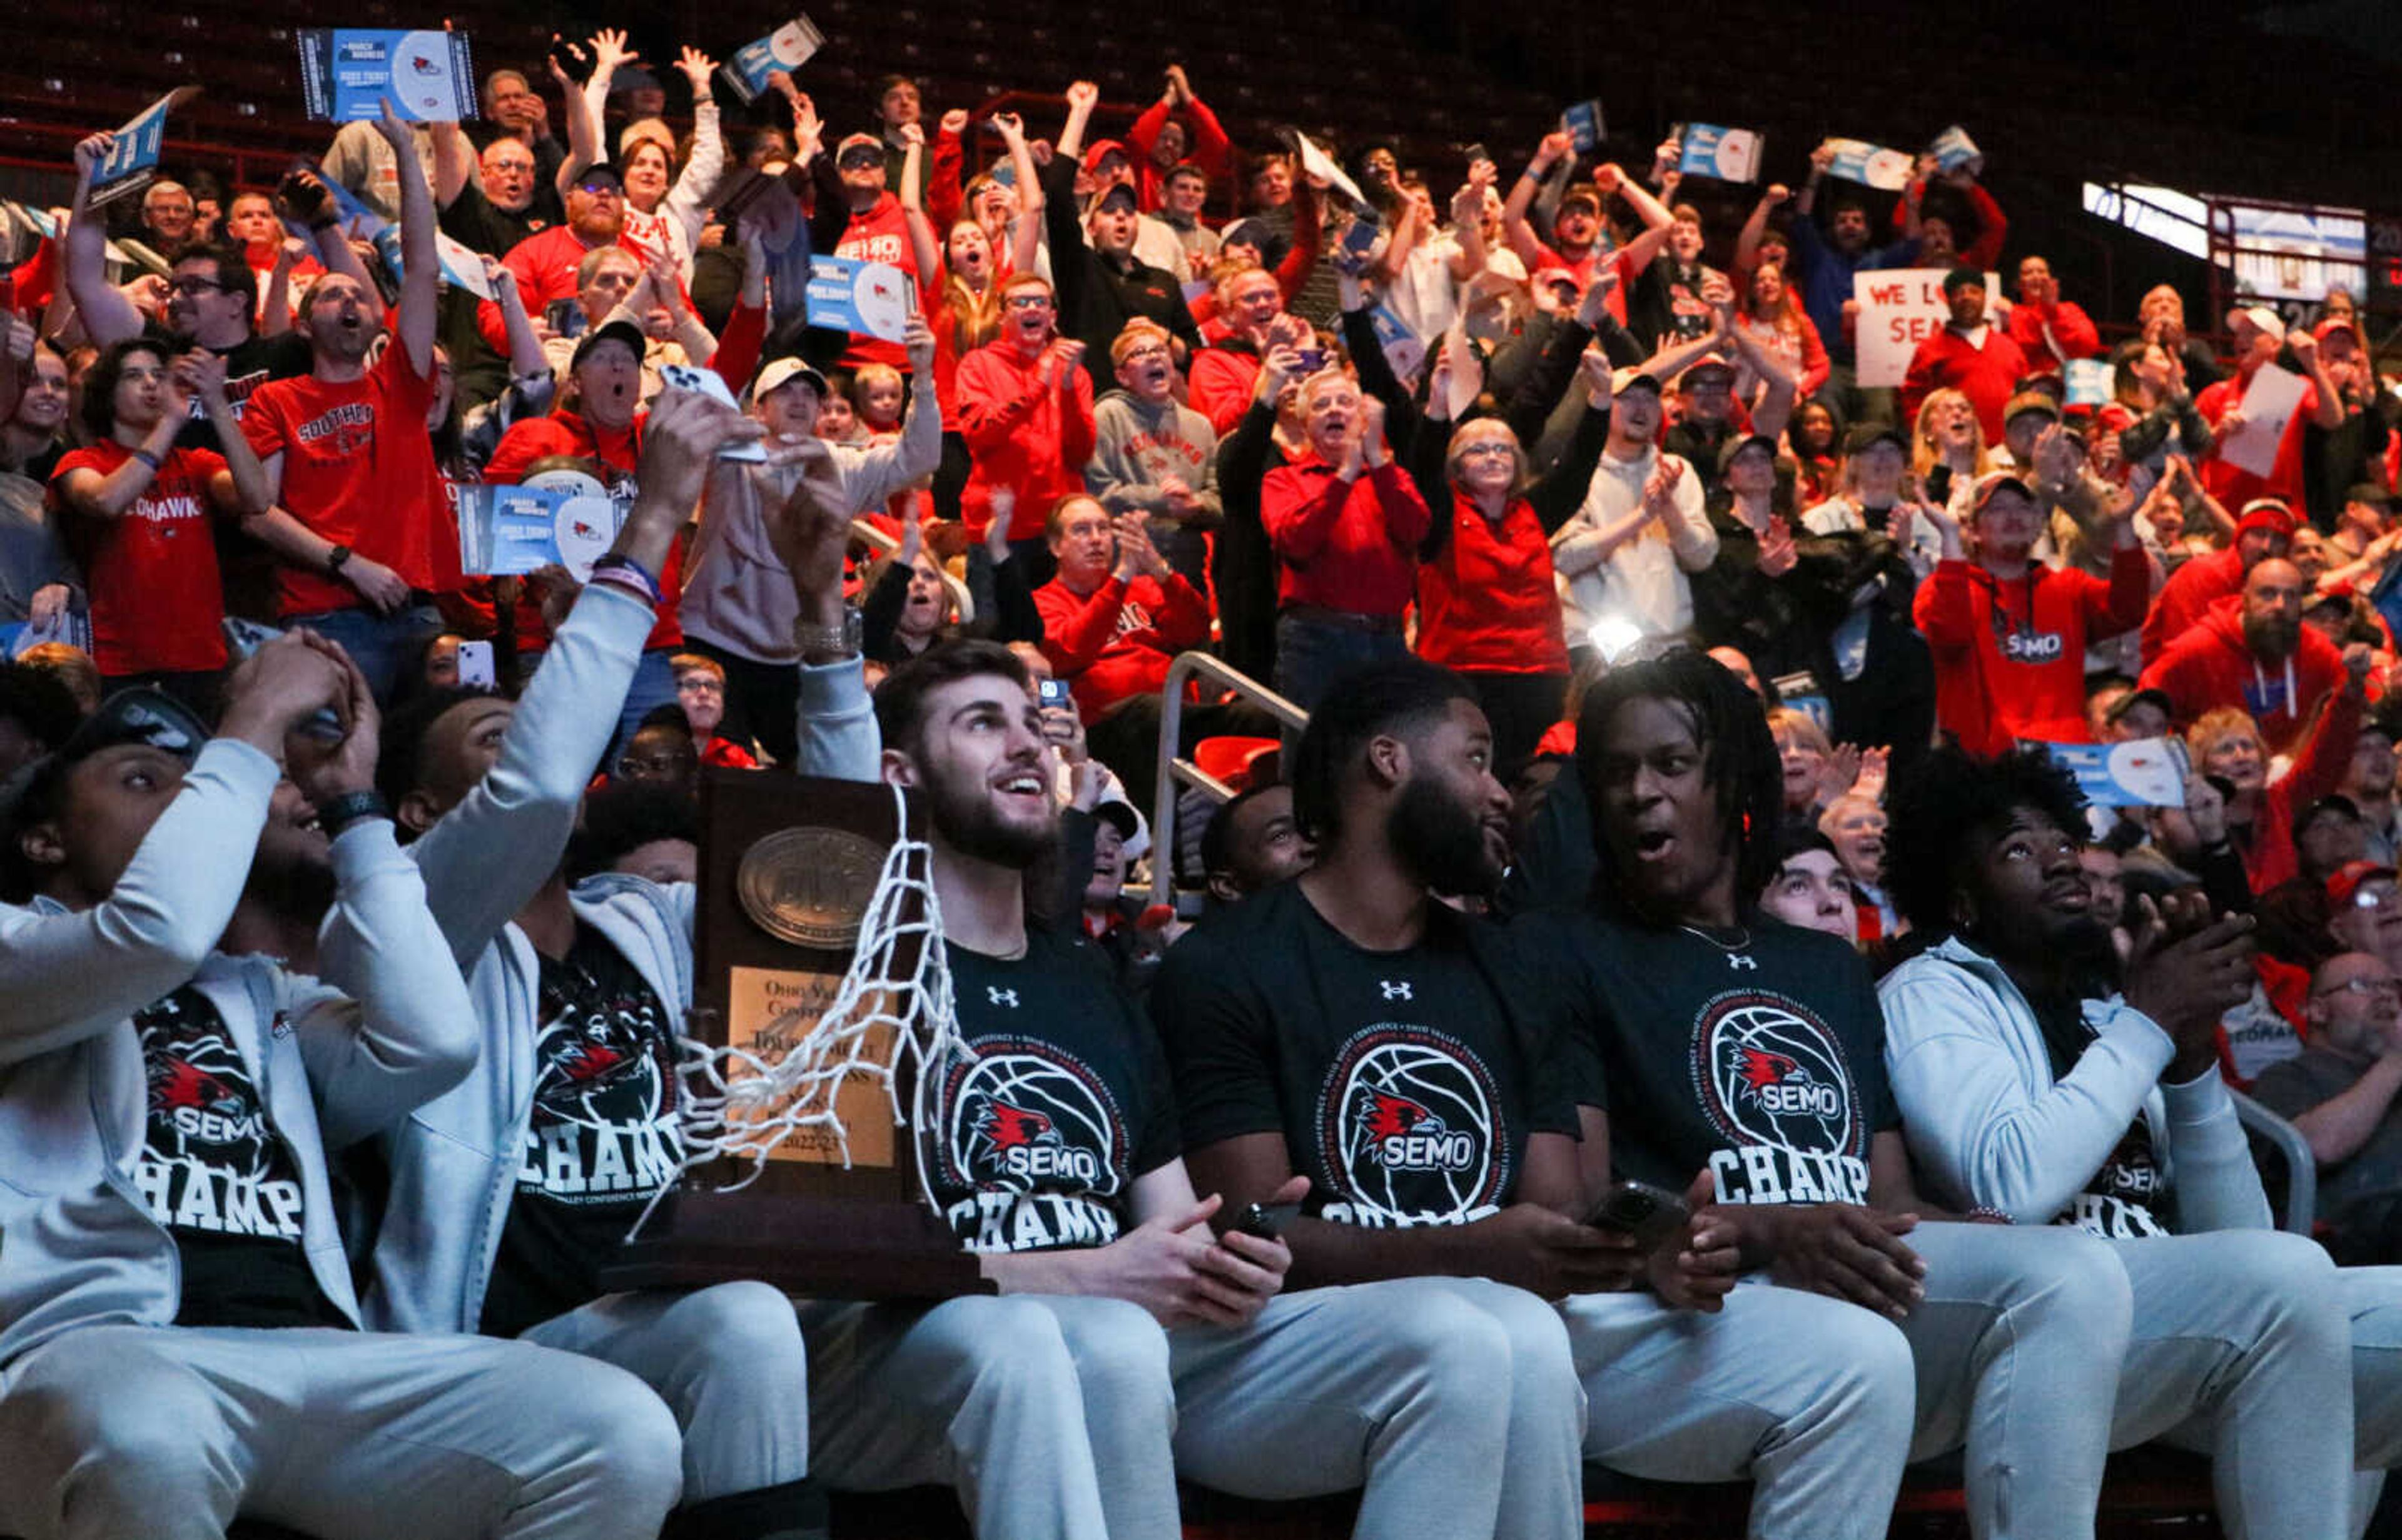 The SEMO men's basketball team cheer in reaction to the announcement of their first four matchup opponent while fans cheer behind them. The team was attending the Selection Sunday public showing event at the Show Me Center in Cape Girardeau Missouri on March 12, 2023.